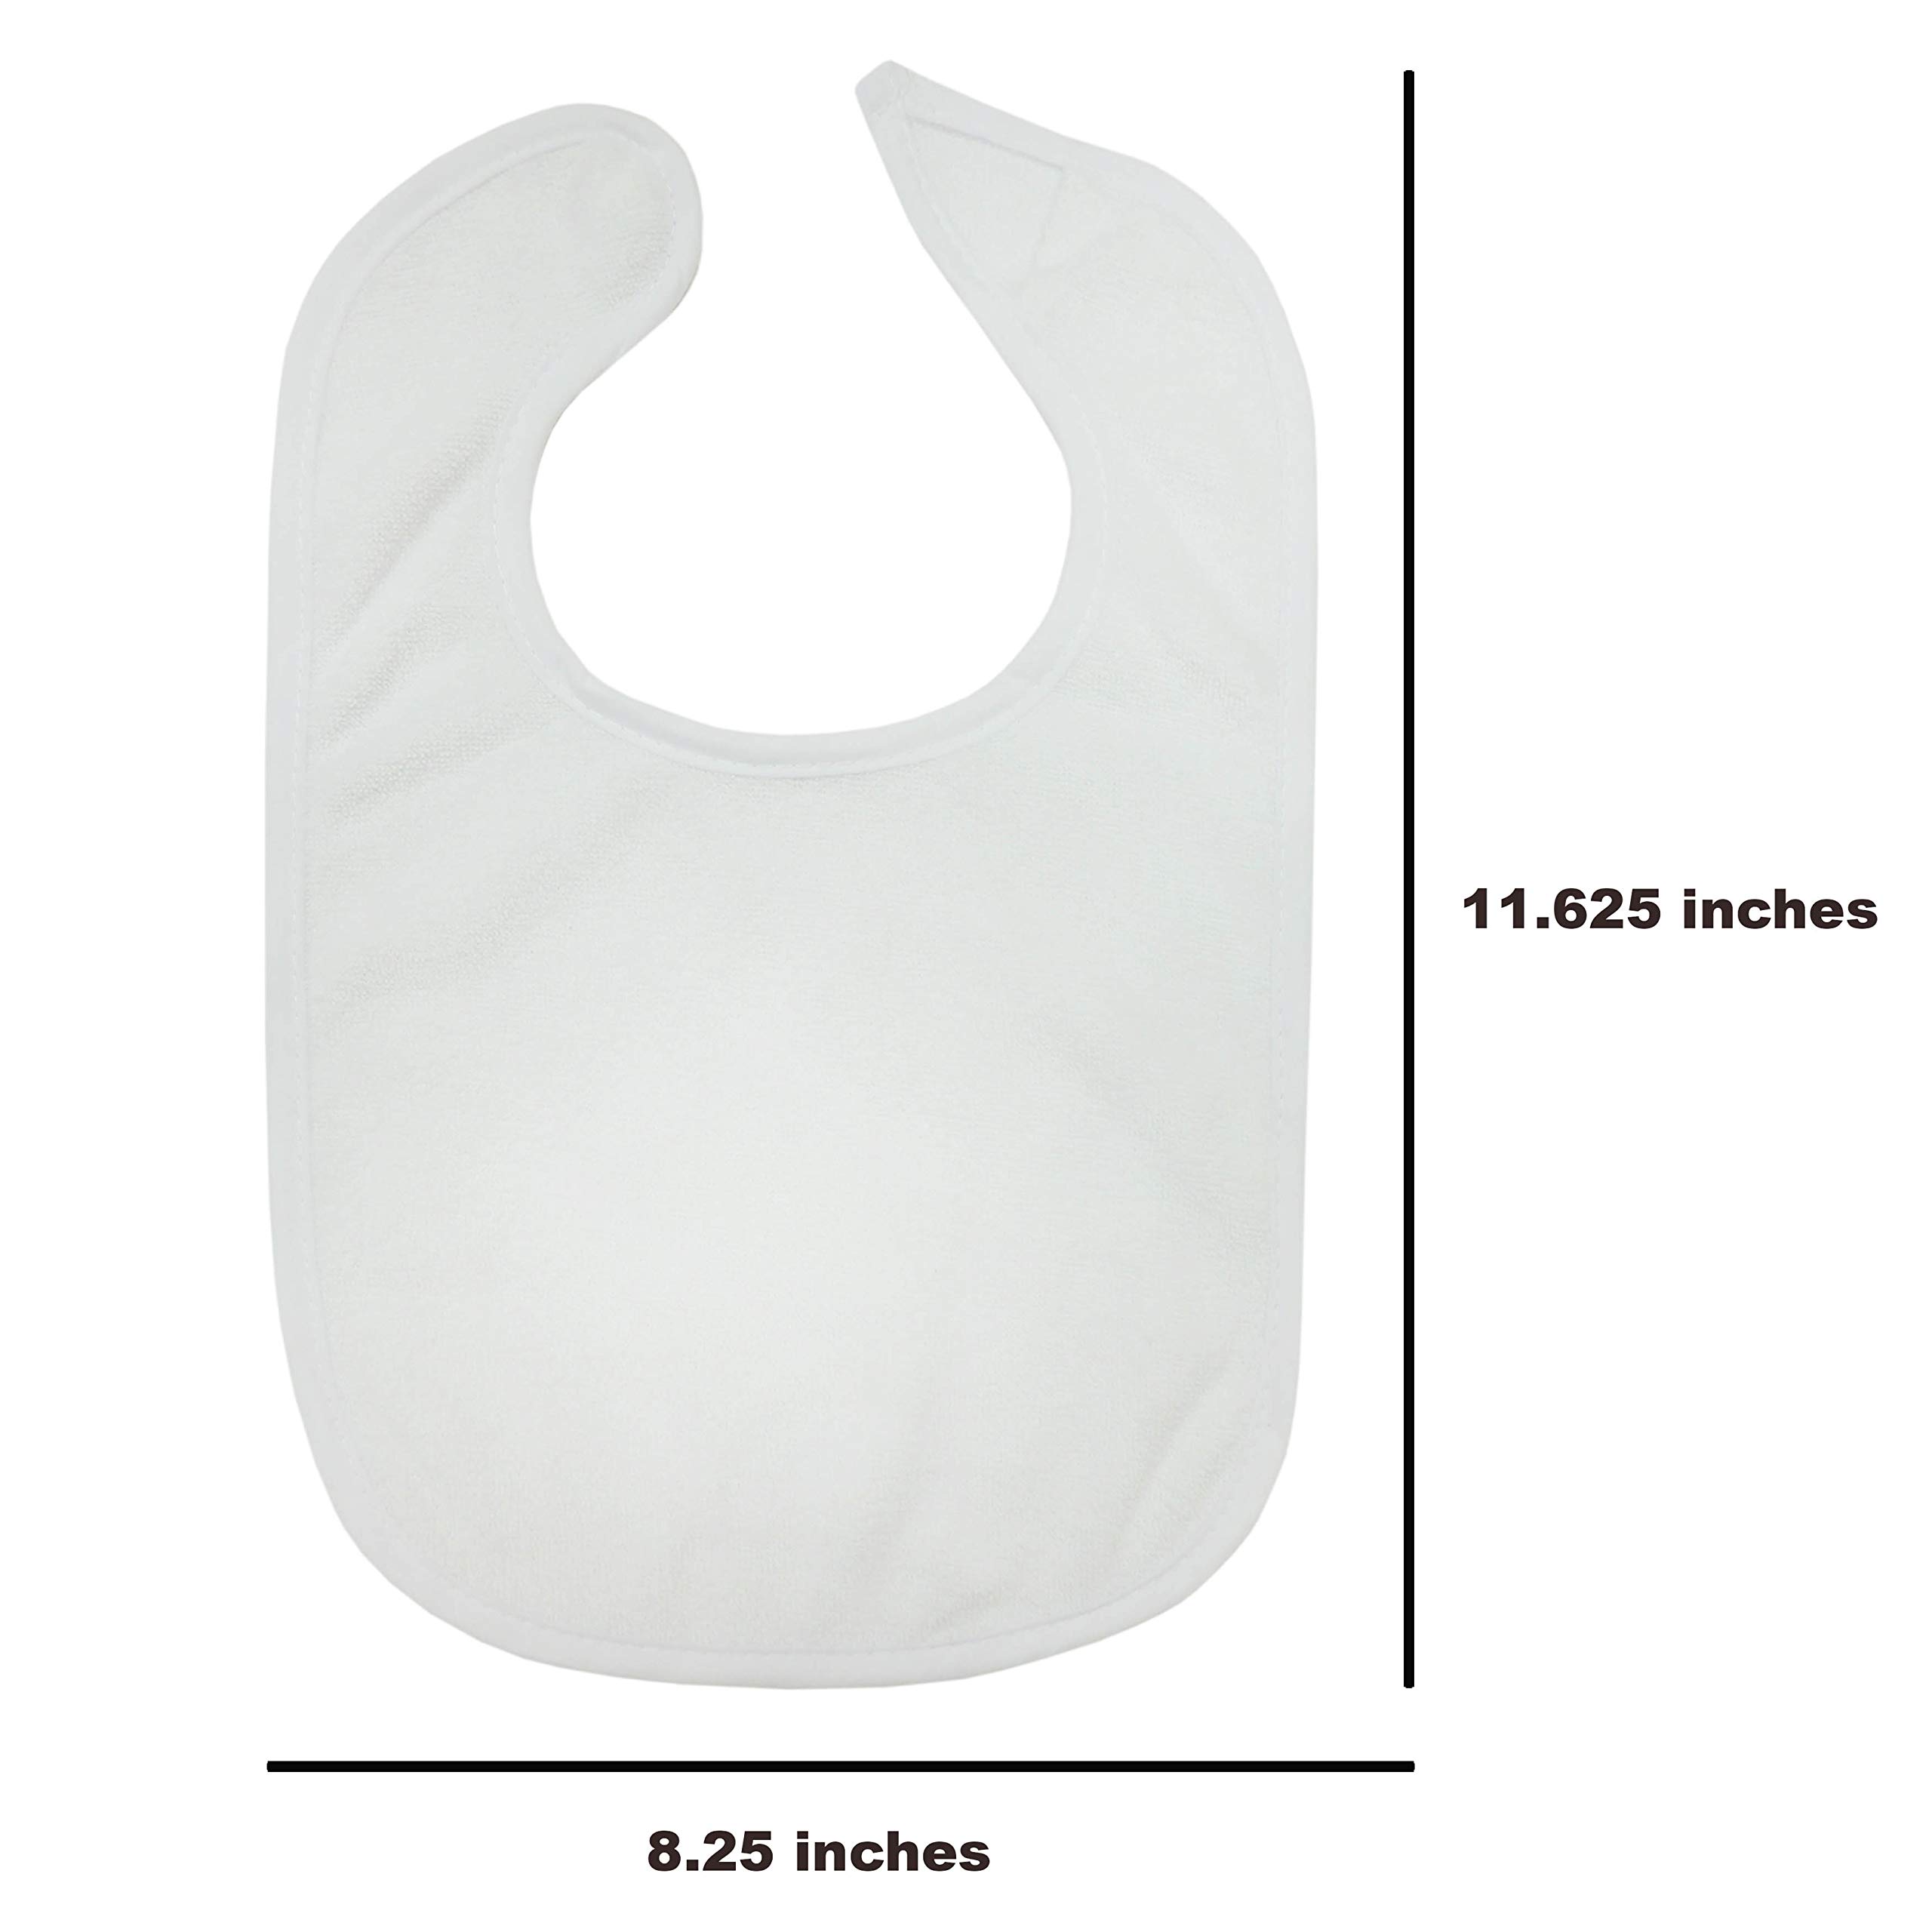 Neat Solutions 2-Ply Knit Terry Solid Color Feeder Bibs in White - 10 Count(Pack of 1)